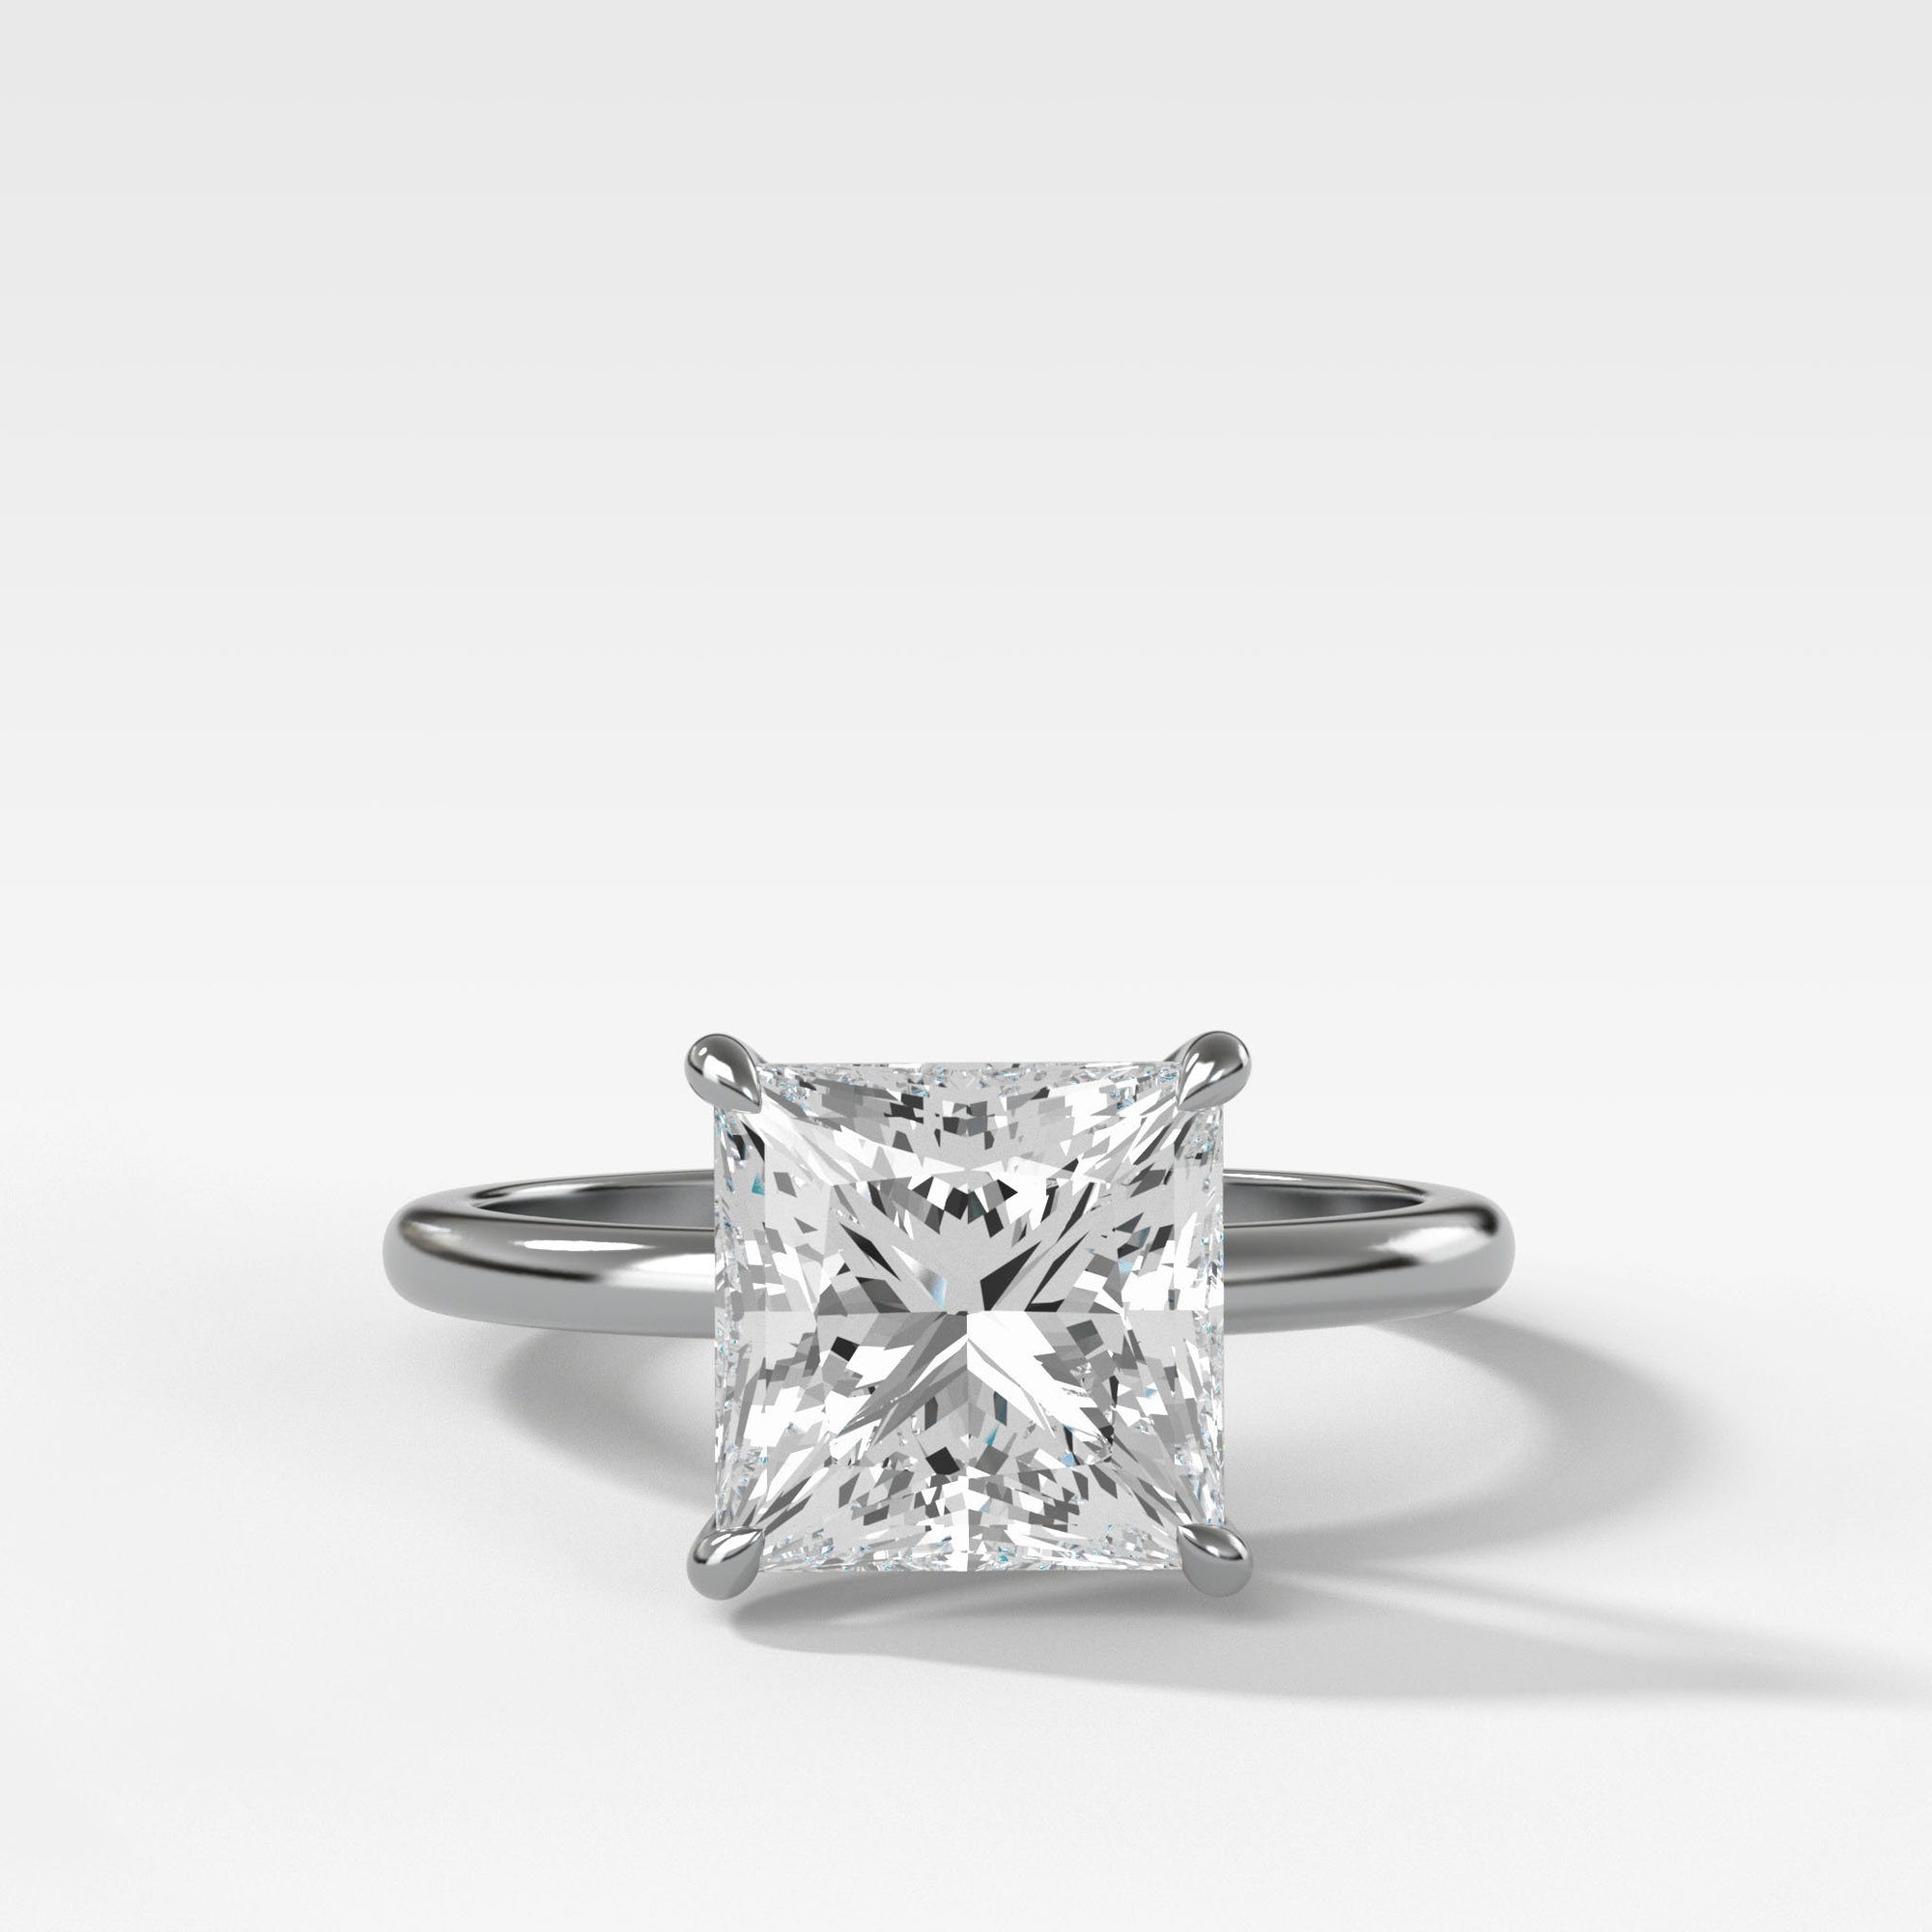 Crescent Solitaire With Princess Cut by Good Stone in Yellow Gold